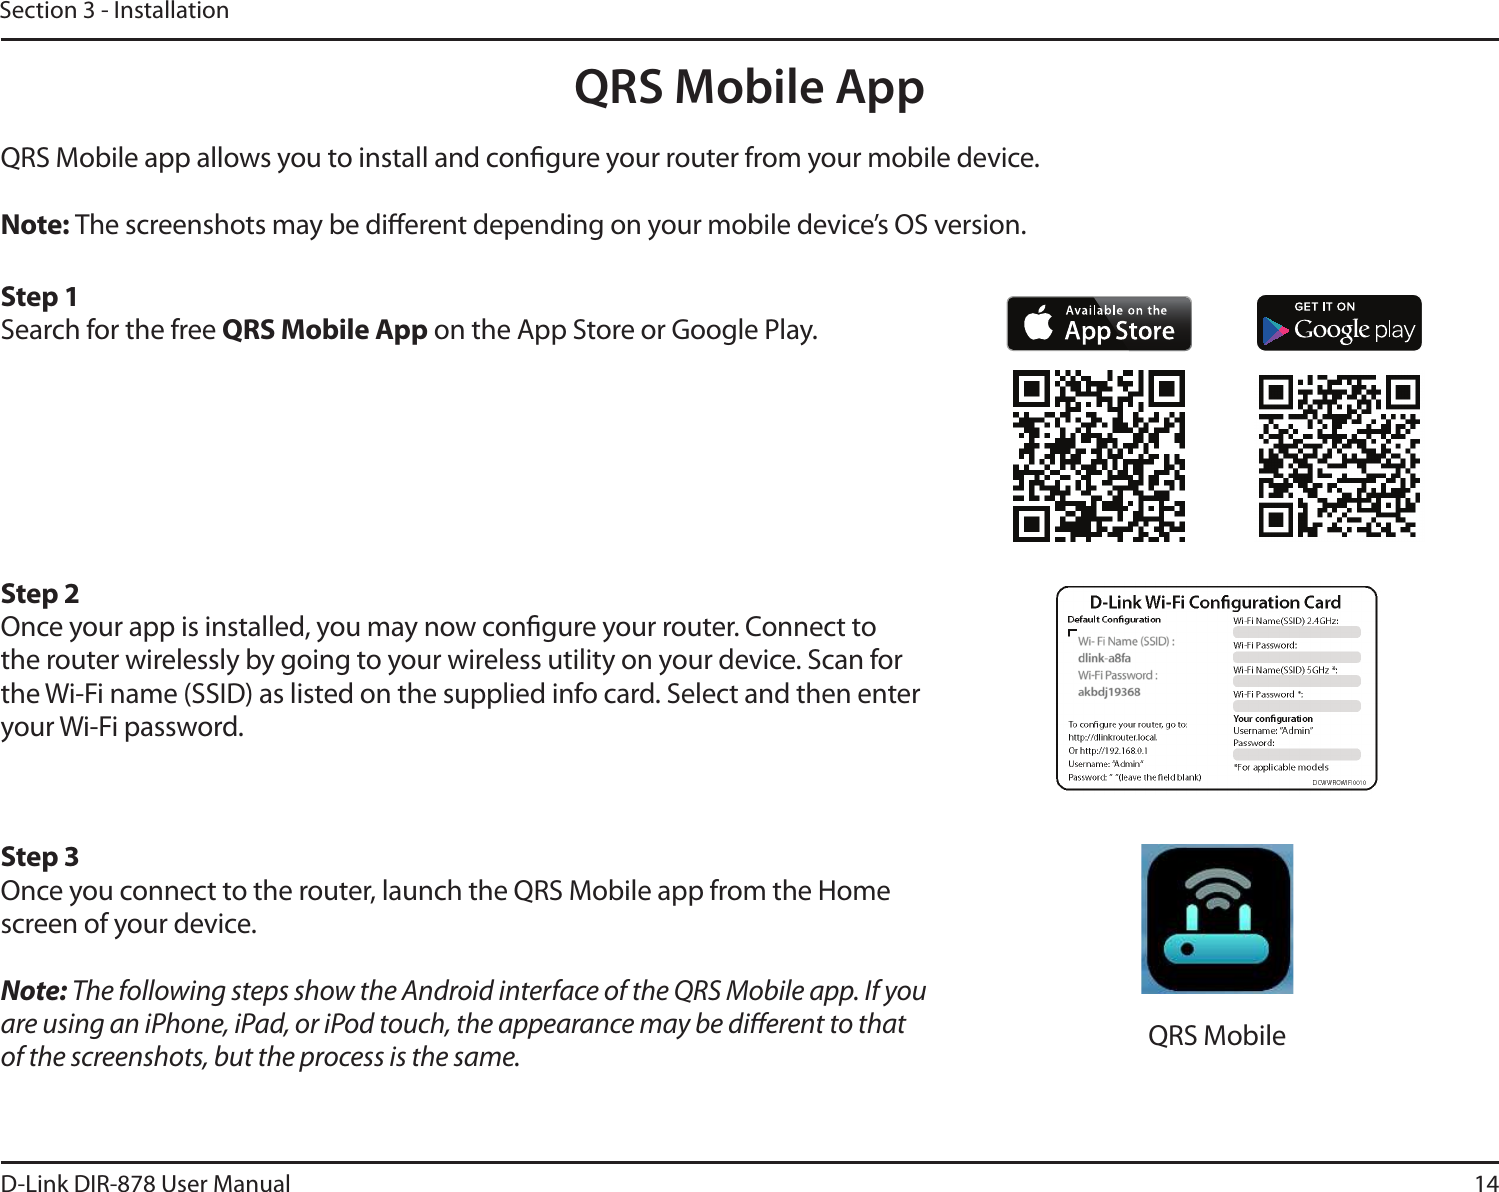 14D-Link DIR-878 User ManualSection 3 - InstallationQRS Mobile AppQRS Mobile app allows you to install and congure your router from your mobile device.Note: The screenshots may be dierent depending on your mobile device’s OS version. Step 1Search for the free 234.PCJMF&quot;QQ on the App Store or Google Play.Step 2Once your app is installed, you may now congure your router. Connect to the router wirelessly by going to your wireless utility on your device. Scan for the Wi-Fi name (SSID) as listed on the supplied info card. Select and then enter your Wi-Fi password.Step 3Once you connect to the router, launch the QRS Mobile app from the Home screen of your device.Note: The following steps show the Android interface of the QRS Mobile app. If you are using an iPhone, iPad, or iPod touch, the appearance may be dierent to that of the screenshots, but the process is the same. QRS Mobile